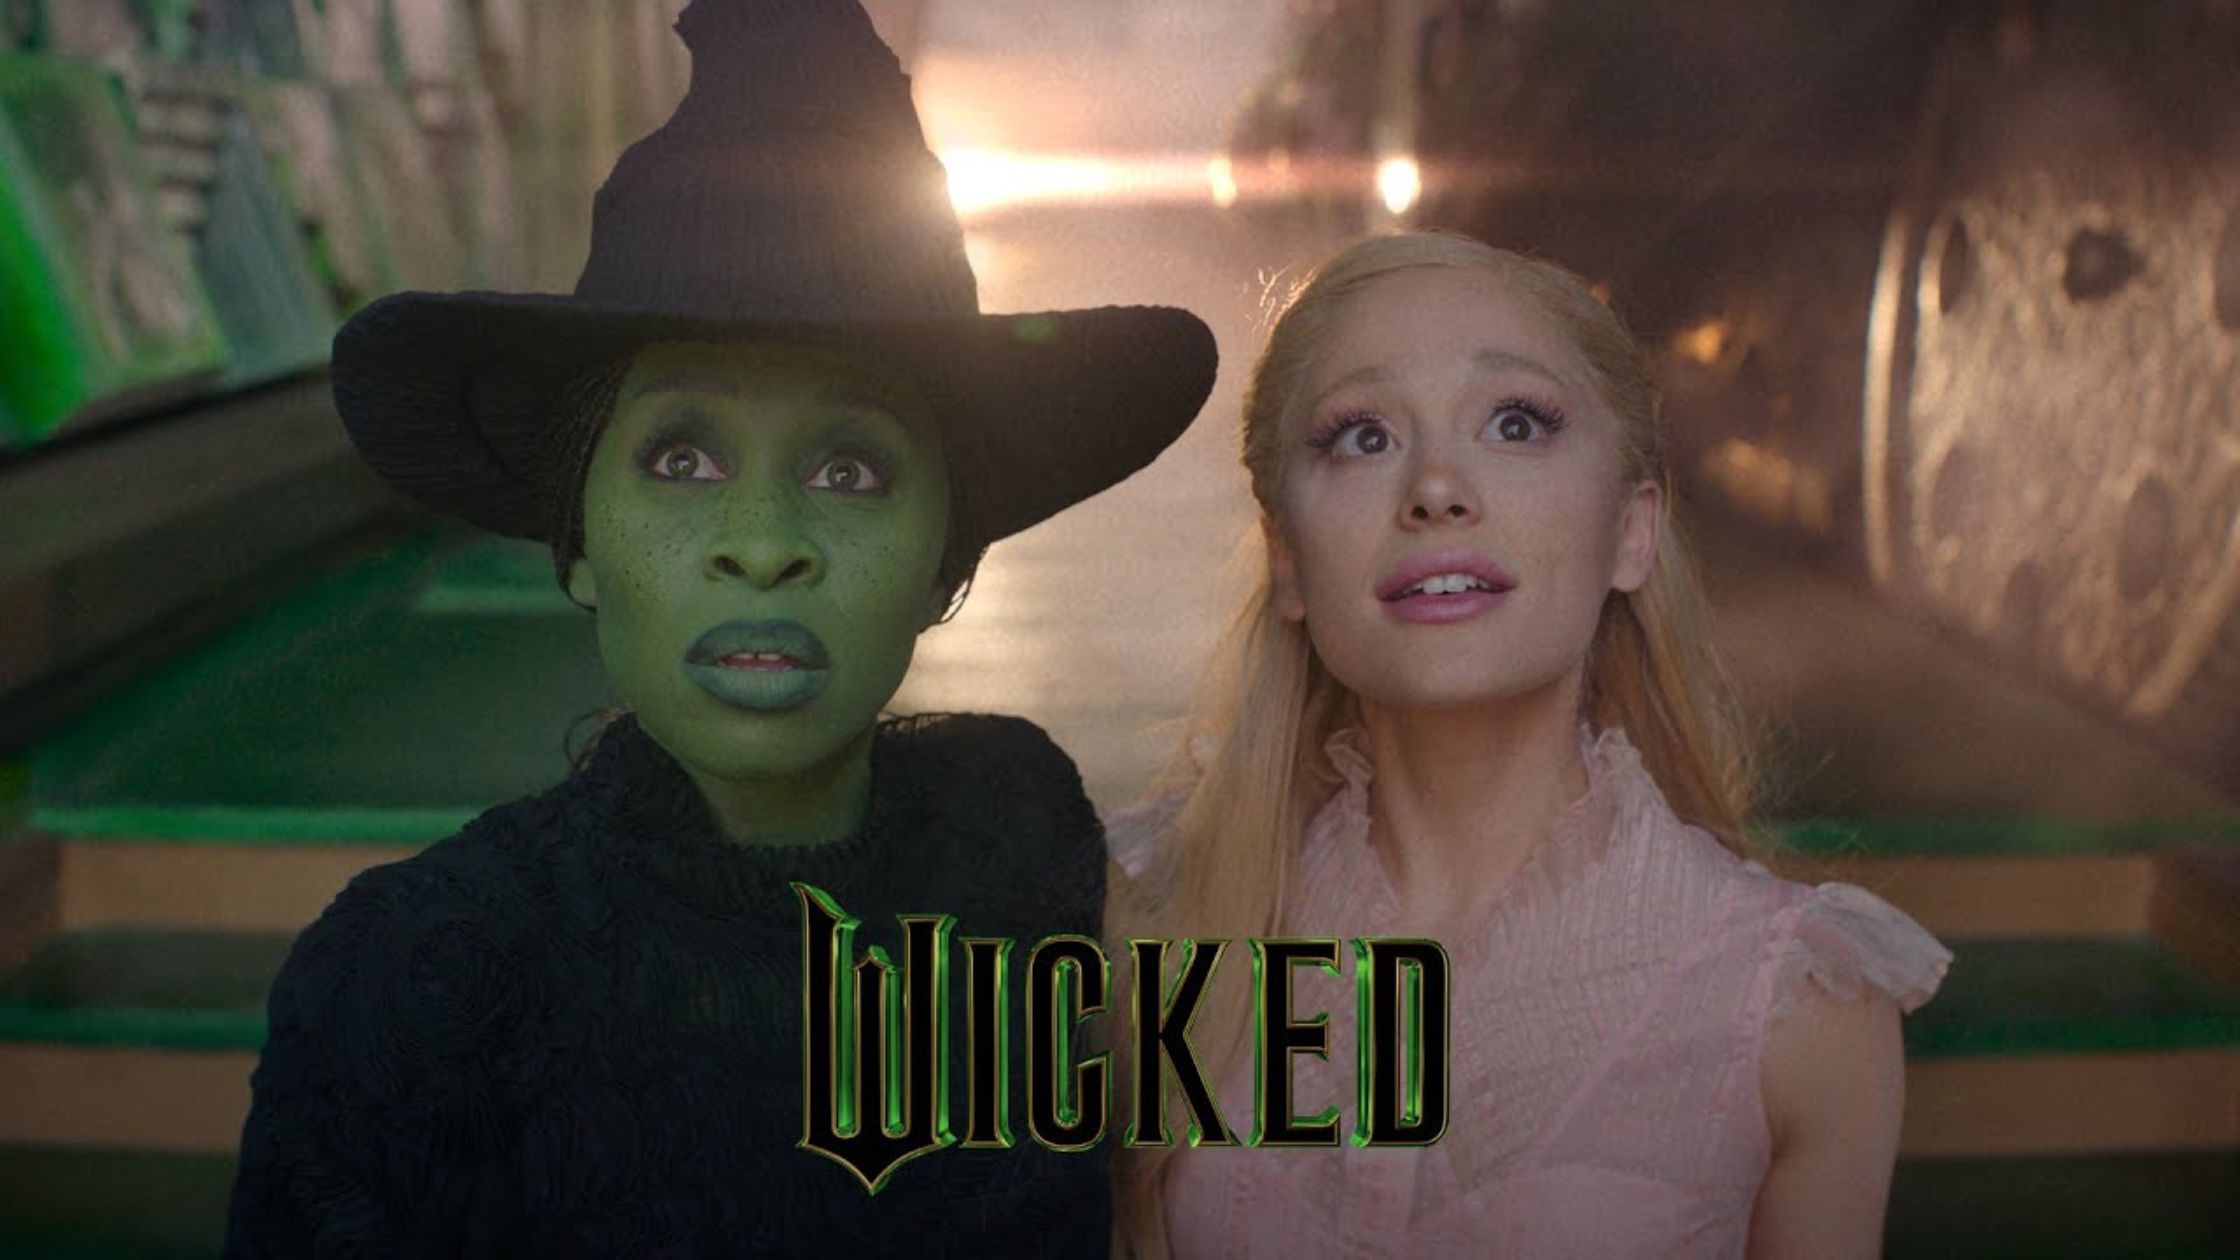 WATCH: 'Wicked' Film Releases Official Trailer